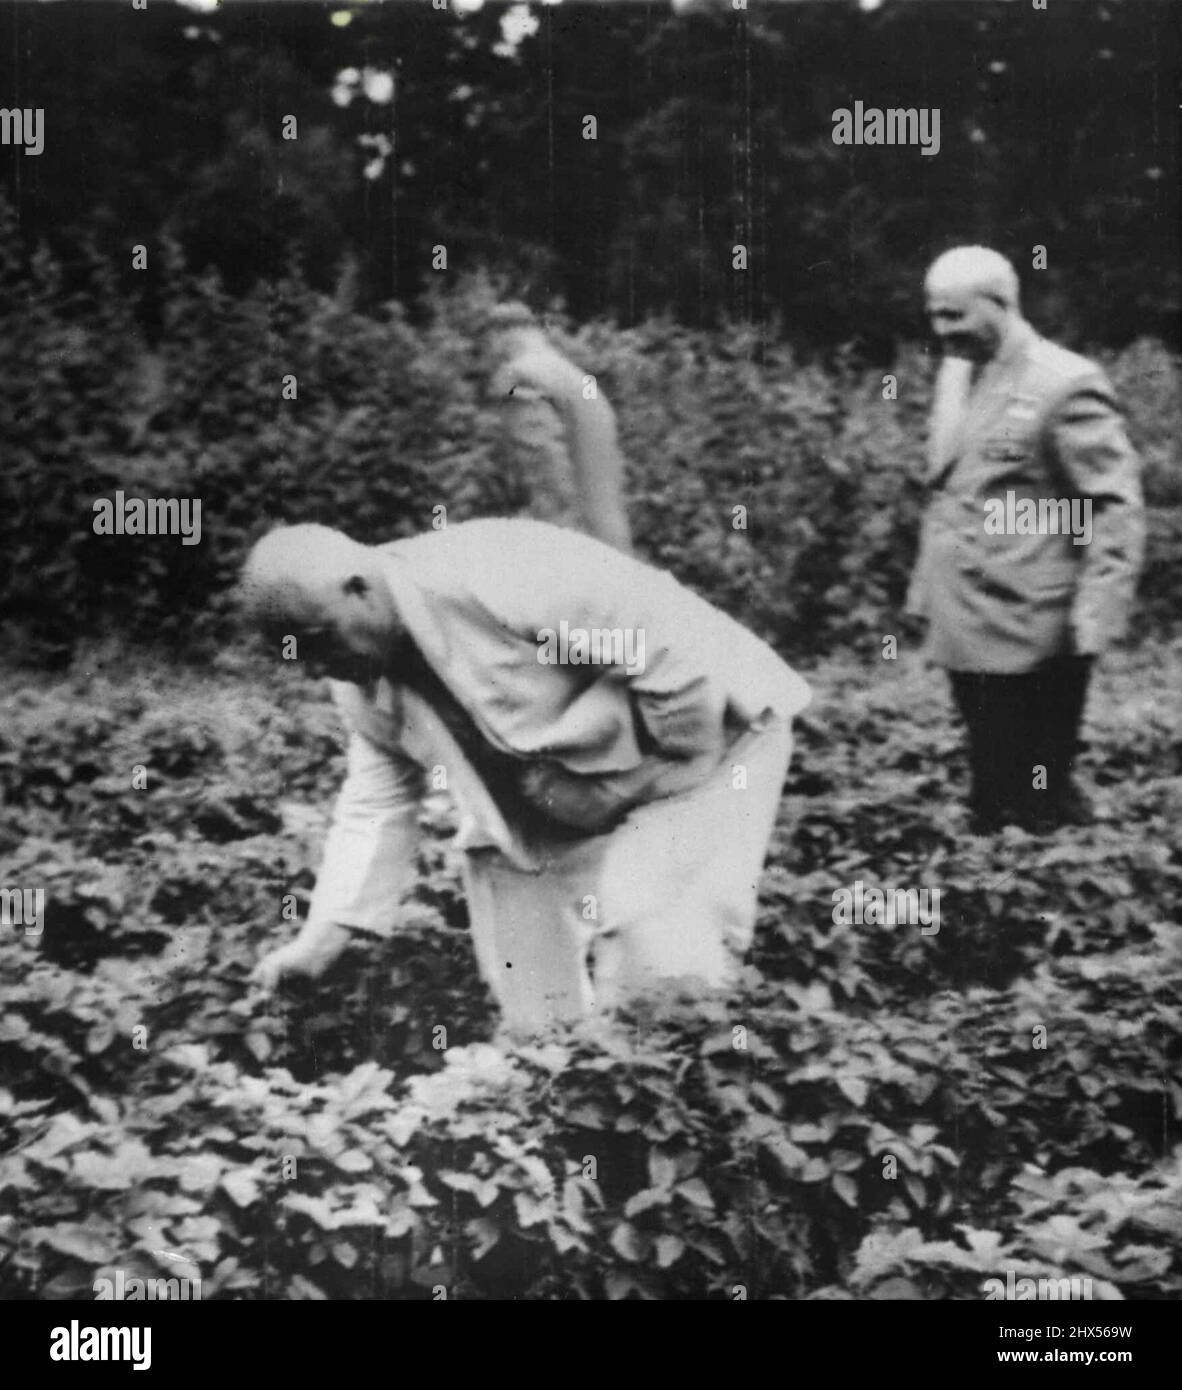 Strawberry Time in Moscow - White-Suited Nikita Khrushchev bends to pick wild Strawberries at Semyonovskaya, the summer residence where Marshal Bulganin Entertained western diplomats at a Sunday garden party, August 7. Behind is Marshal Ivan Koniev, the Soviet Wartime Commander. August 24, 1955. (Photo by Associated Press Photo). Stock Photo